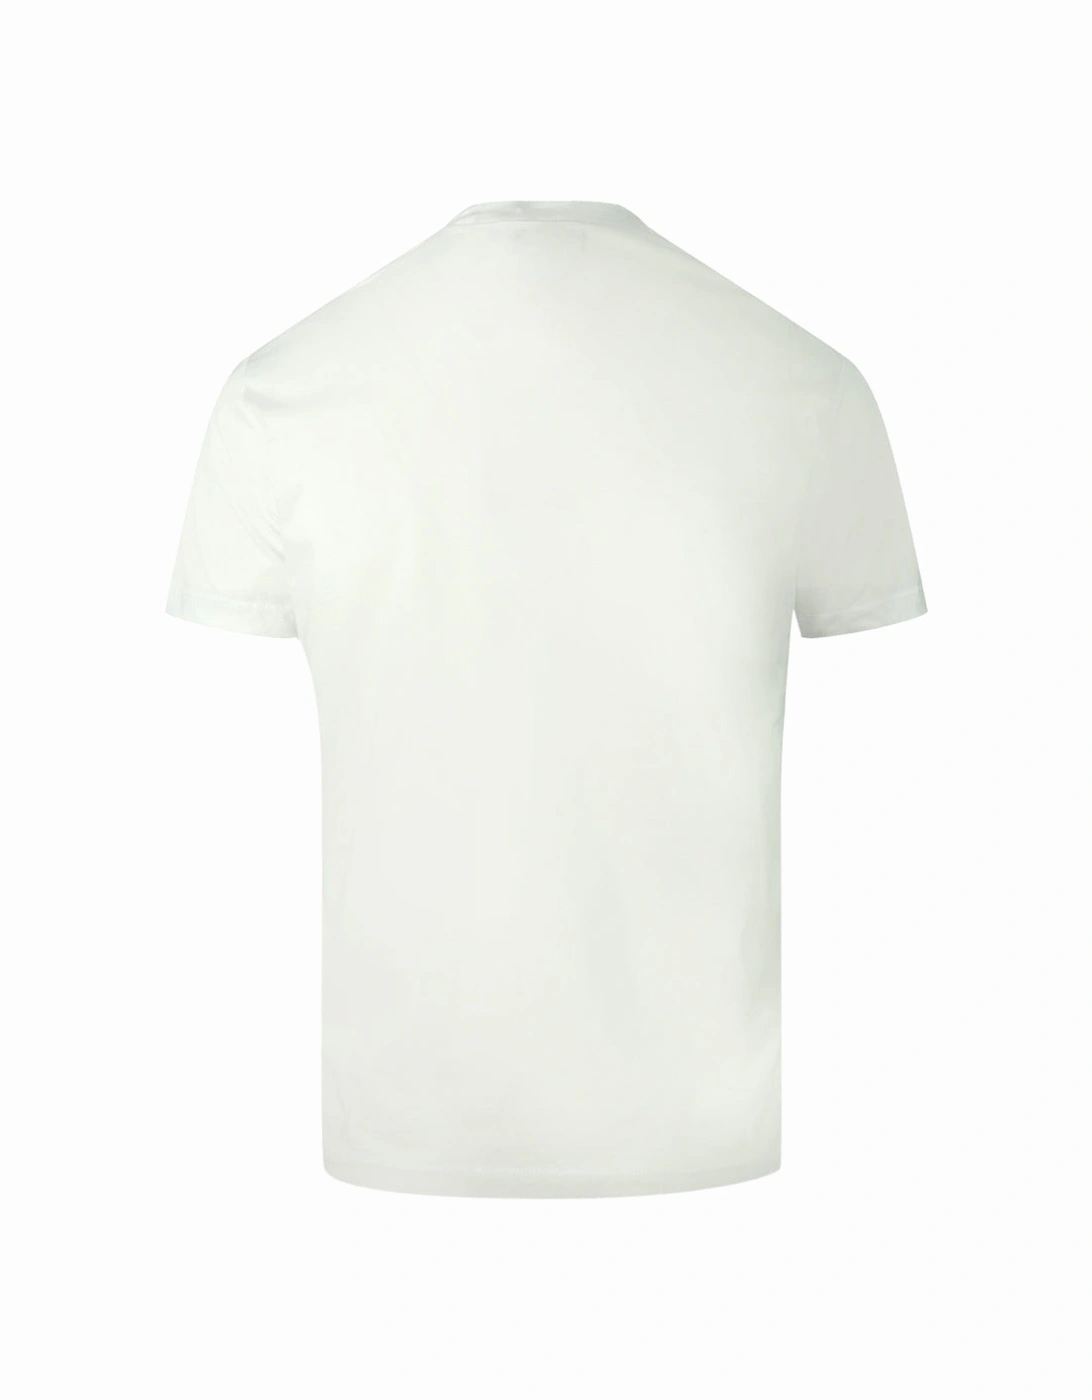 Underlined Logo Cool Fit White T-Shirt